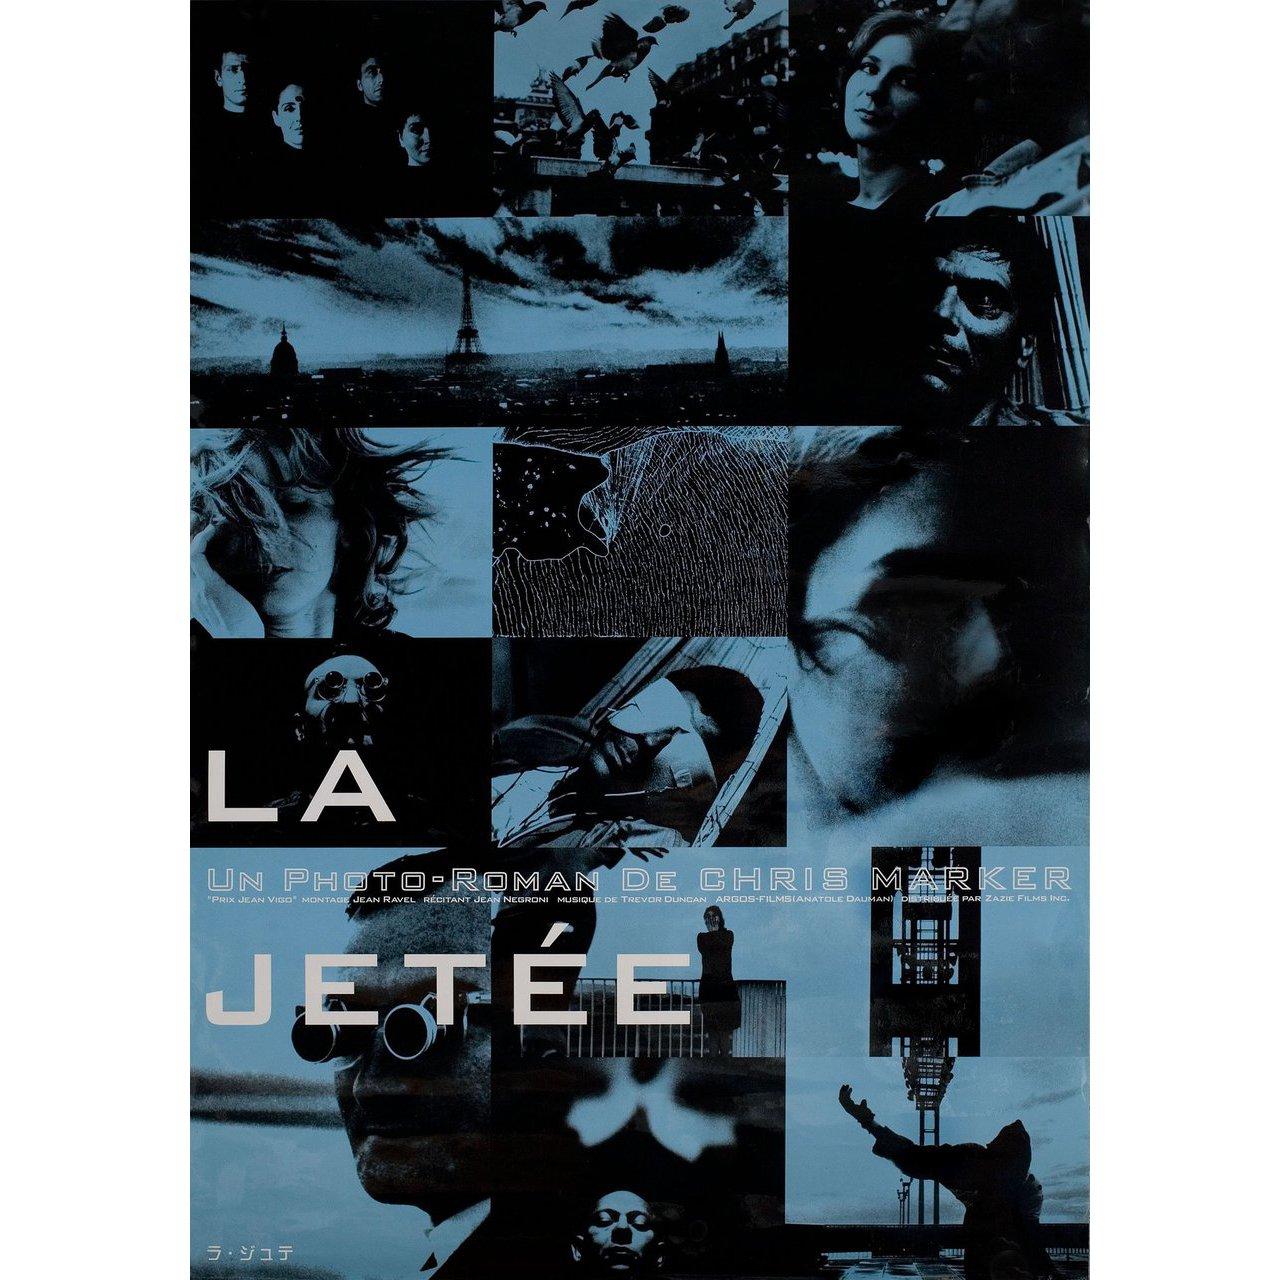 Original 1999 Japanese B2 poster for the first Japanese theatrical release of the 1962 film La Jetee directed by Chris Marker with Jean Negroni / Helene Chatelain / Davos Hanich / Jacques Ledoux. Very good fine condition, rolled with wear on rear